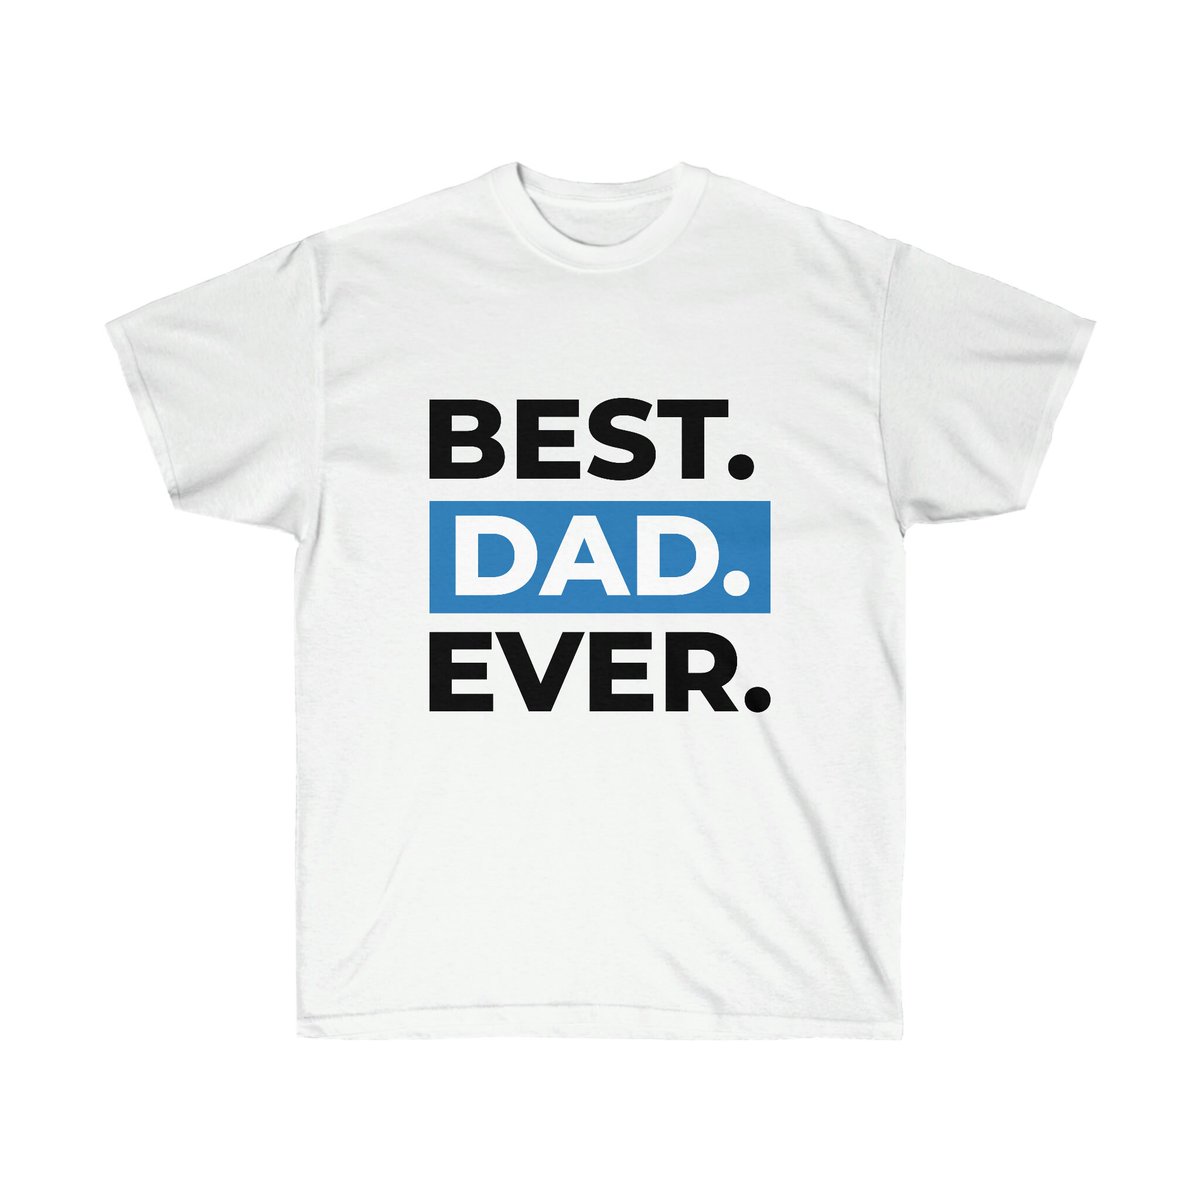 Excited to share the latest addition to my #etsy shop: Best Dad Ever Ultra Cotton Tee etsy.me/42Cpyr1 #tshirt #dad #shopping #fyp #gift #bestdadever #giftfordad #giftforhim #fathersdaygift #menstshirt